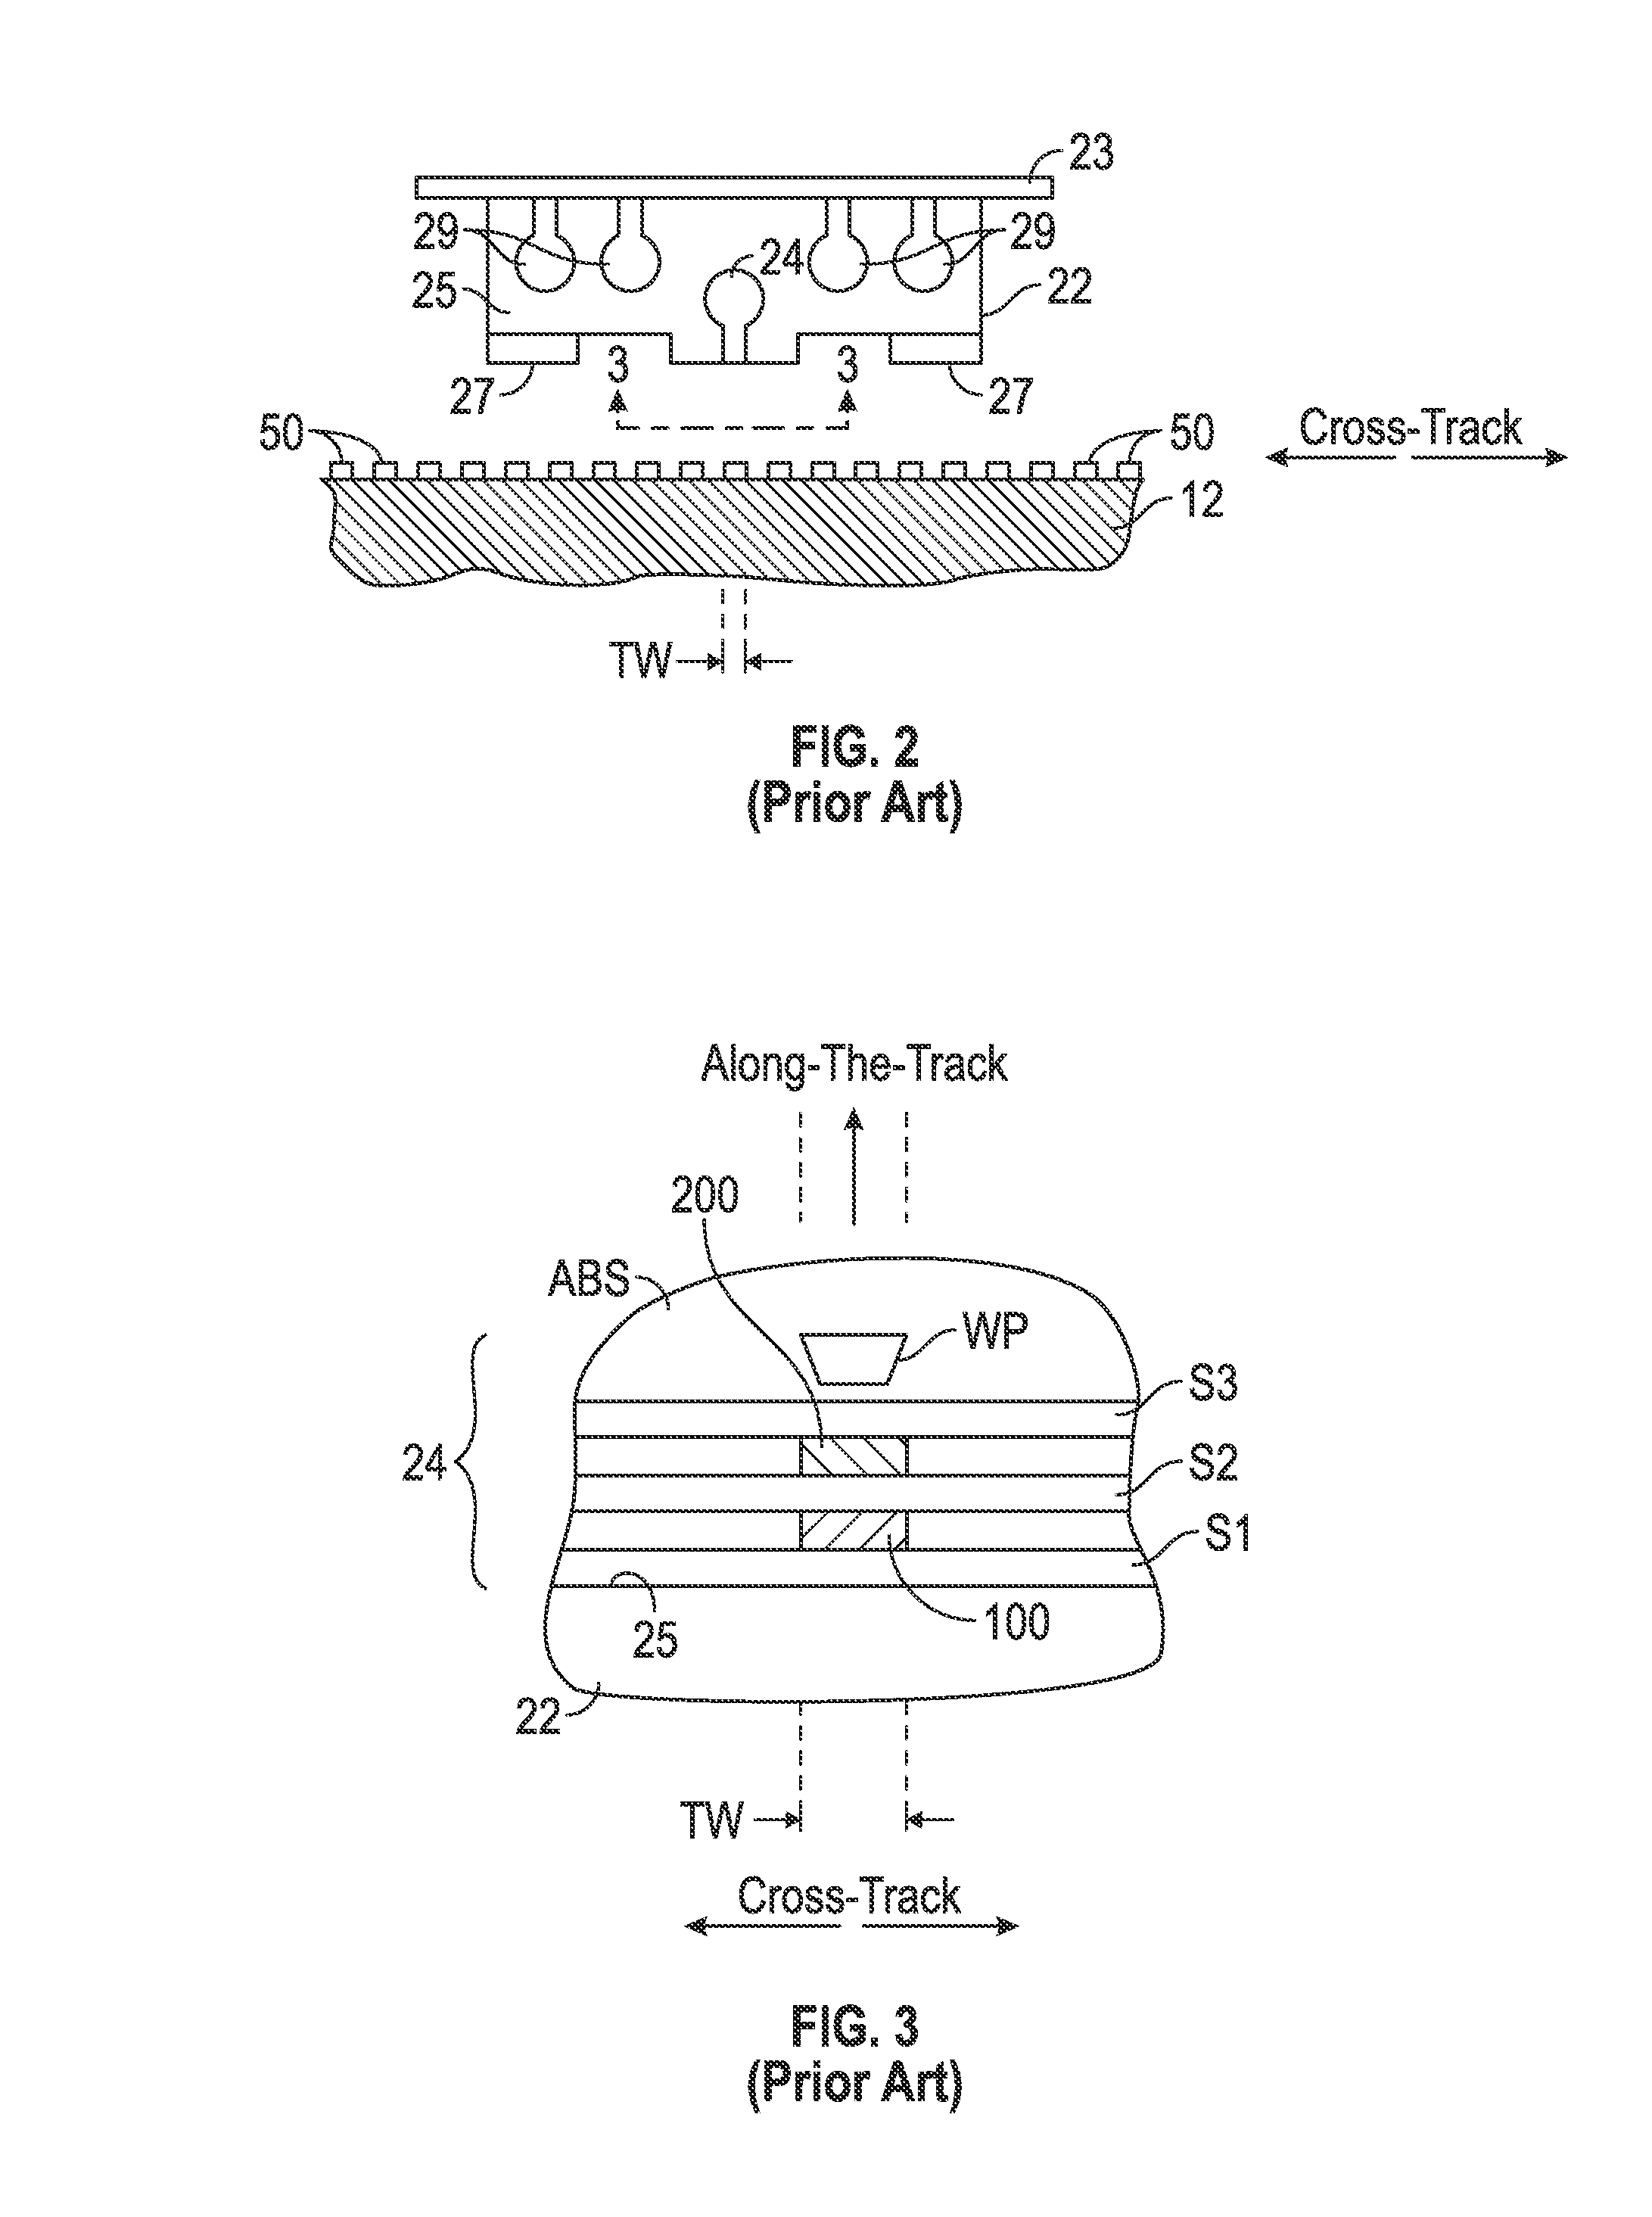 Current-perpendicular-to-the-plane (CPP) magnetoresistive (MR) sensor structure with multiple stacked sensors and improved center shield